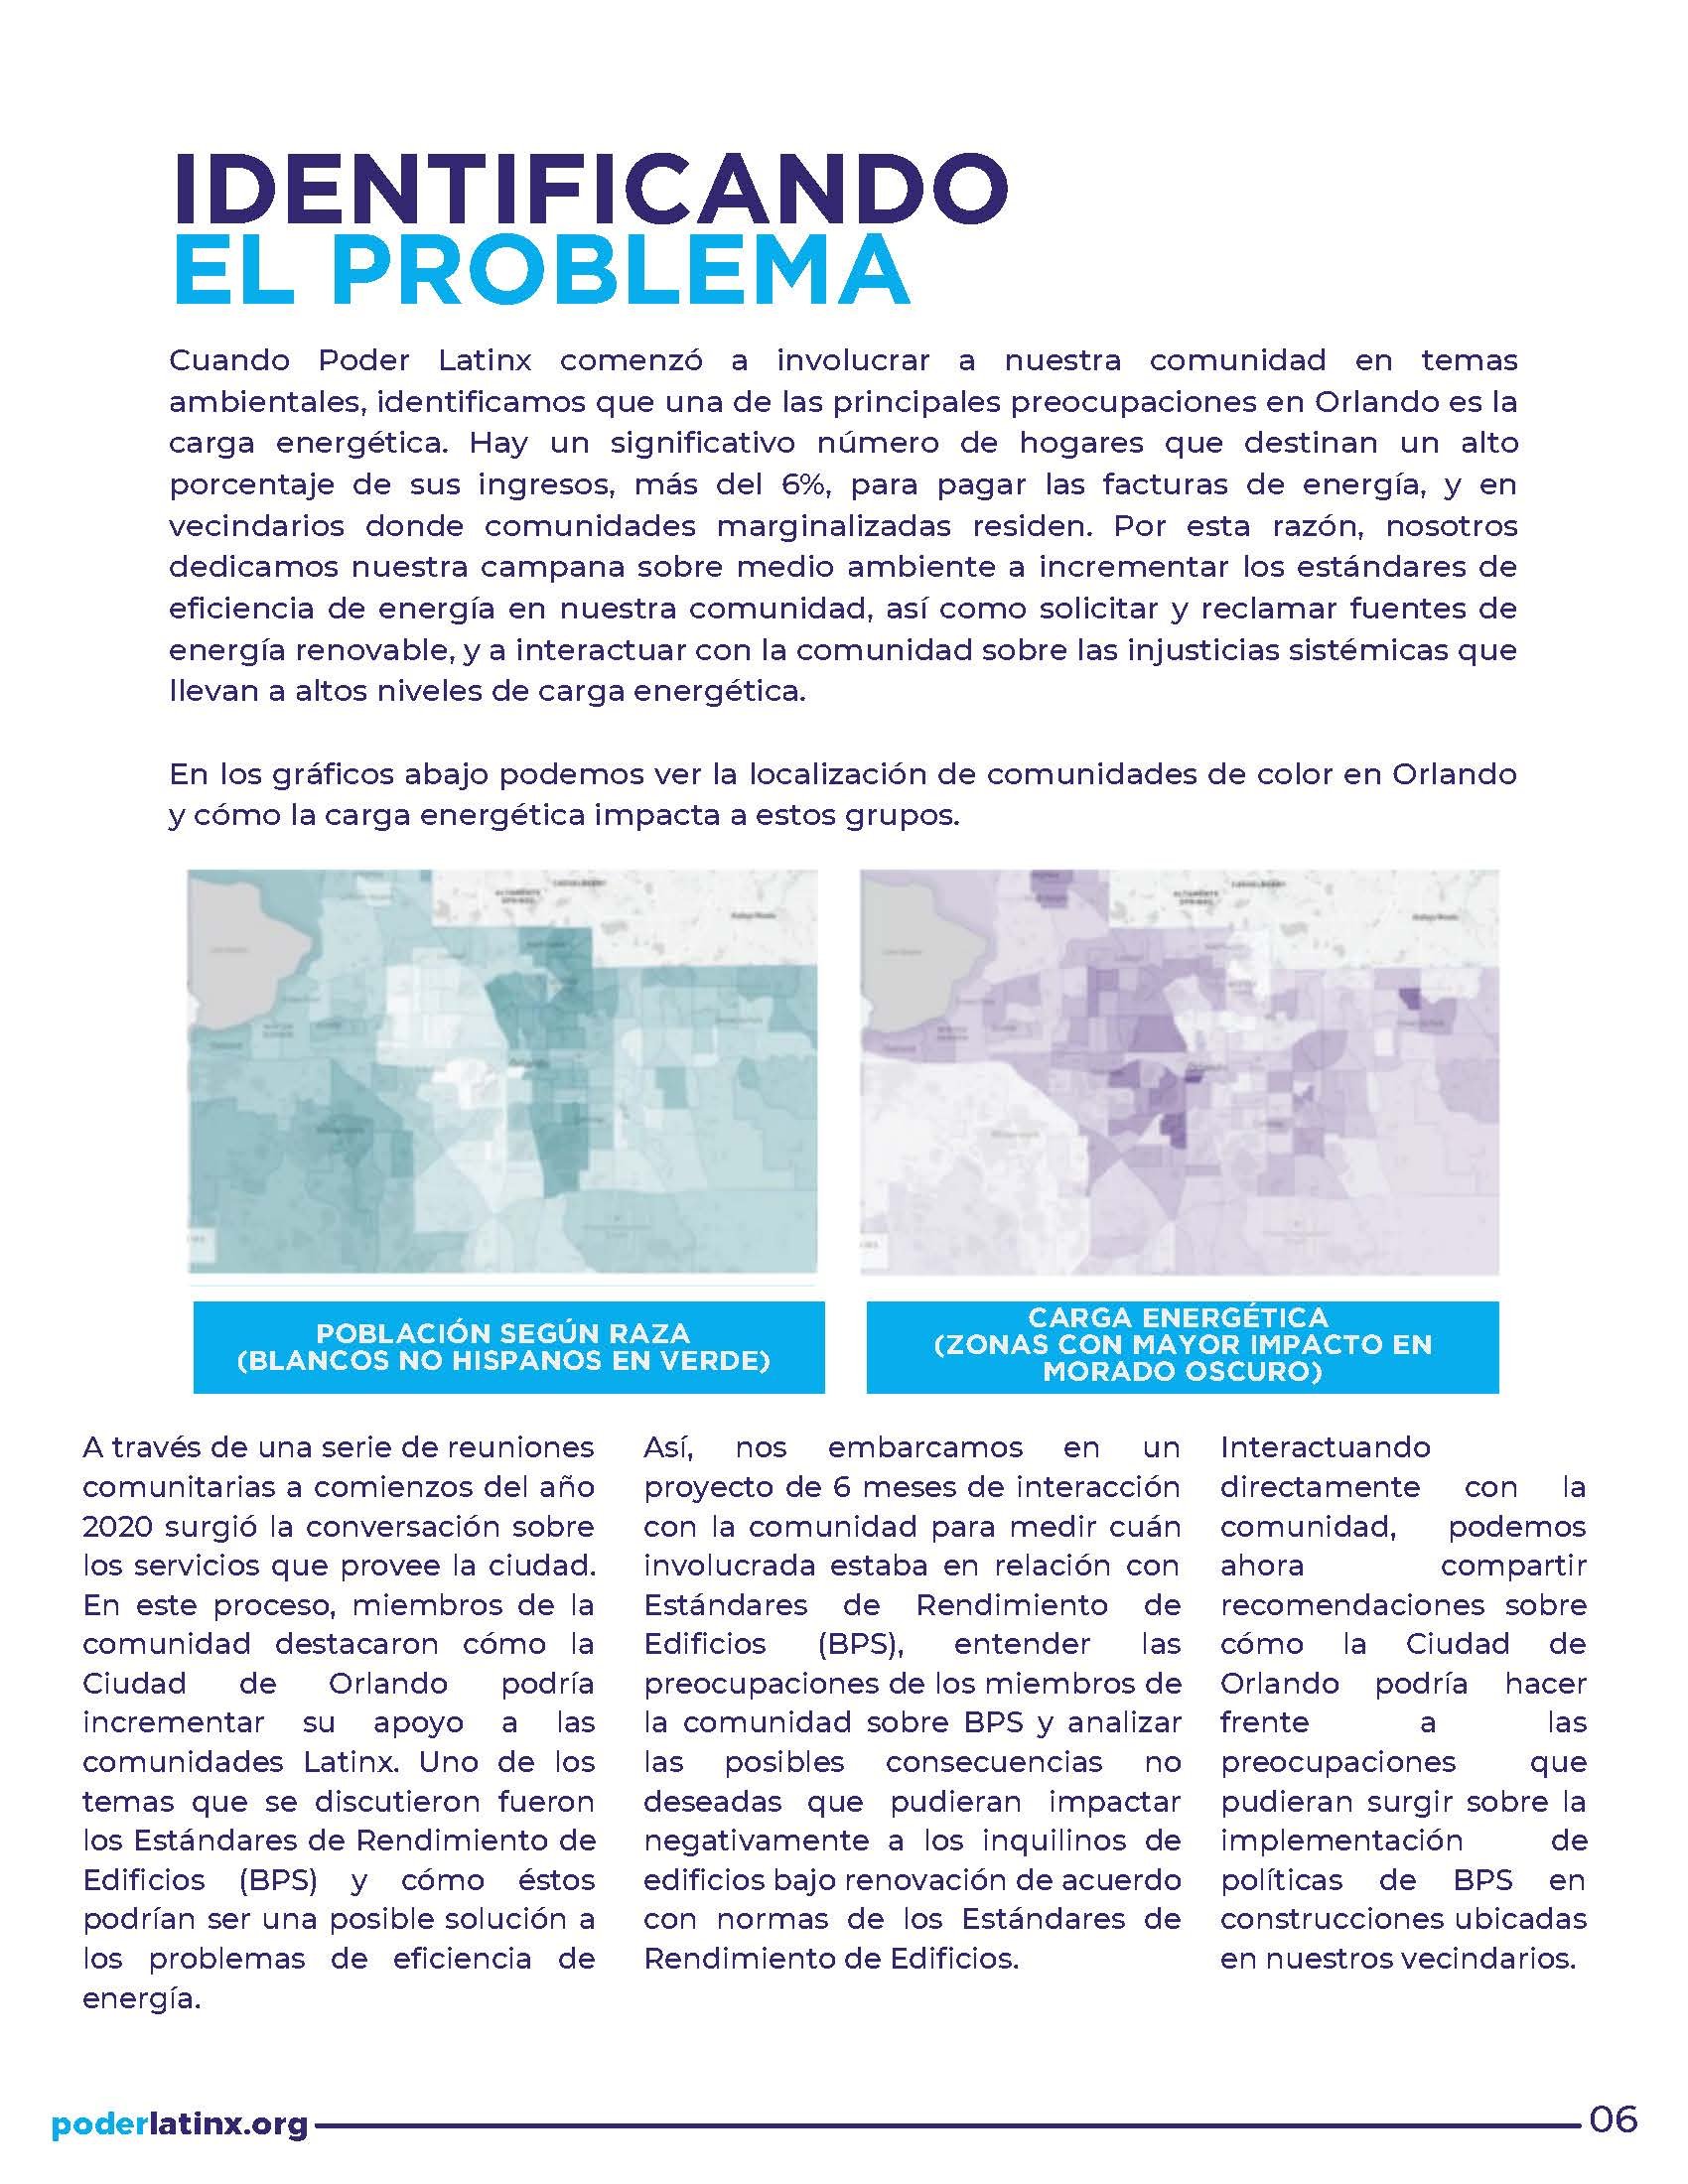 IMT Report - Spanish_Page_06.jpg